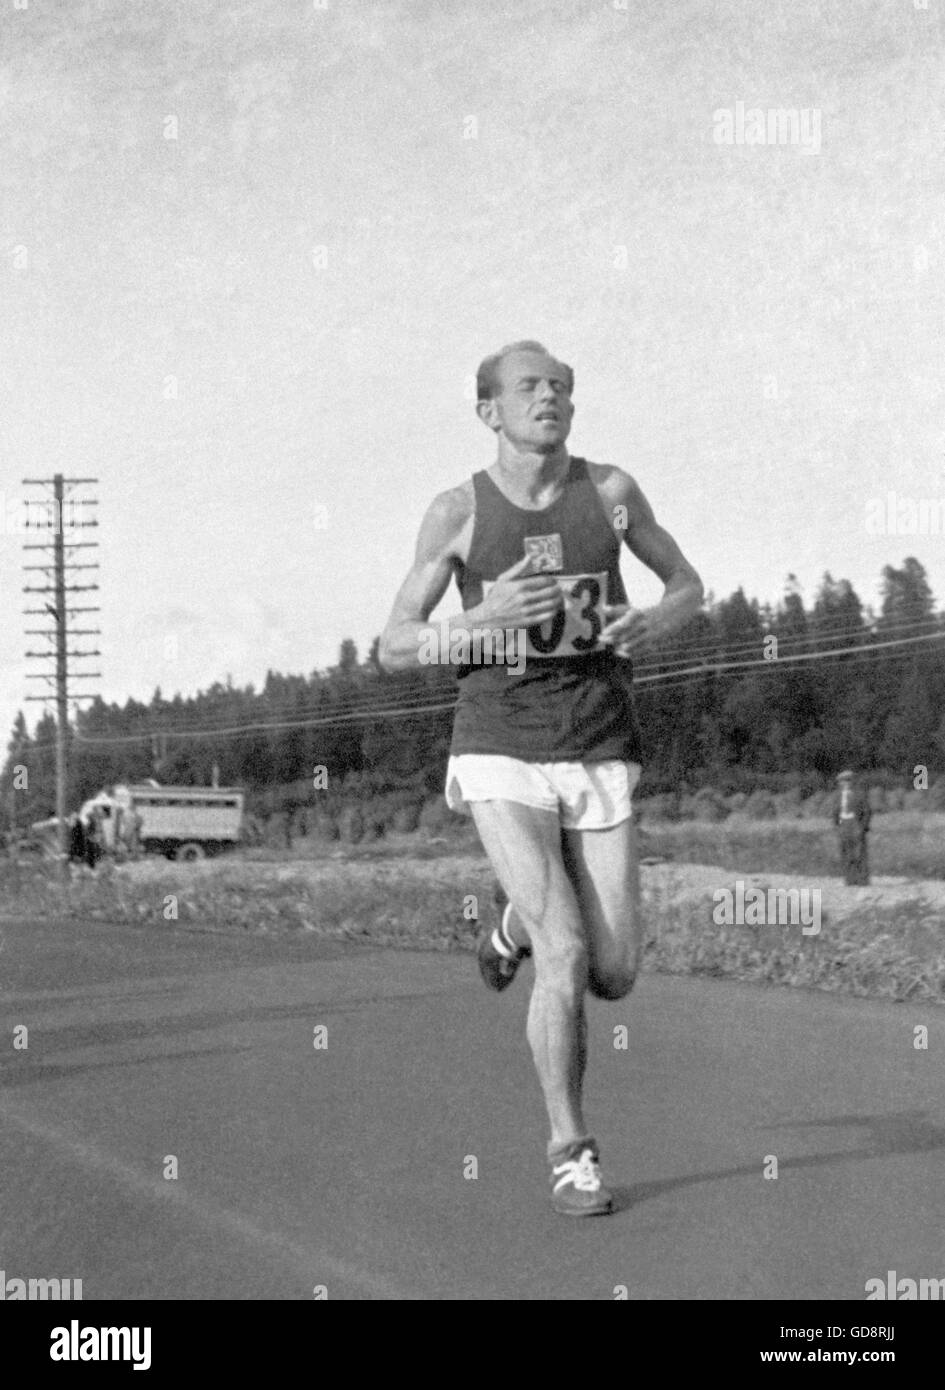 Finland 1952 Olympics, Emil Zatopek, four time Olympic gold medalist winning running 35 km marathon race with number 903 at Helsinki. Stock Photo